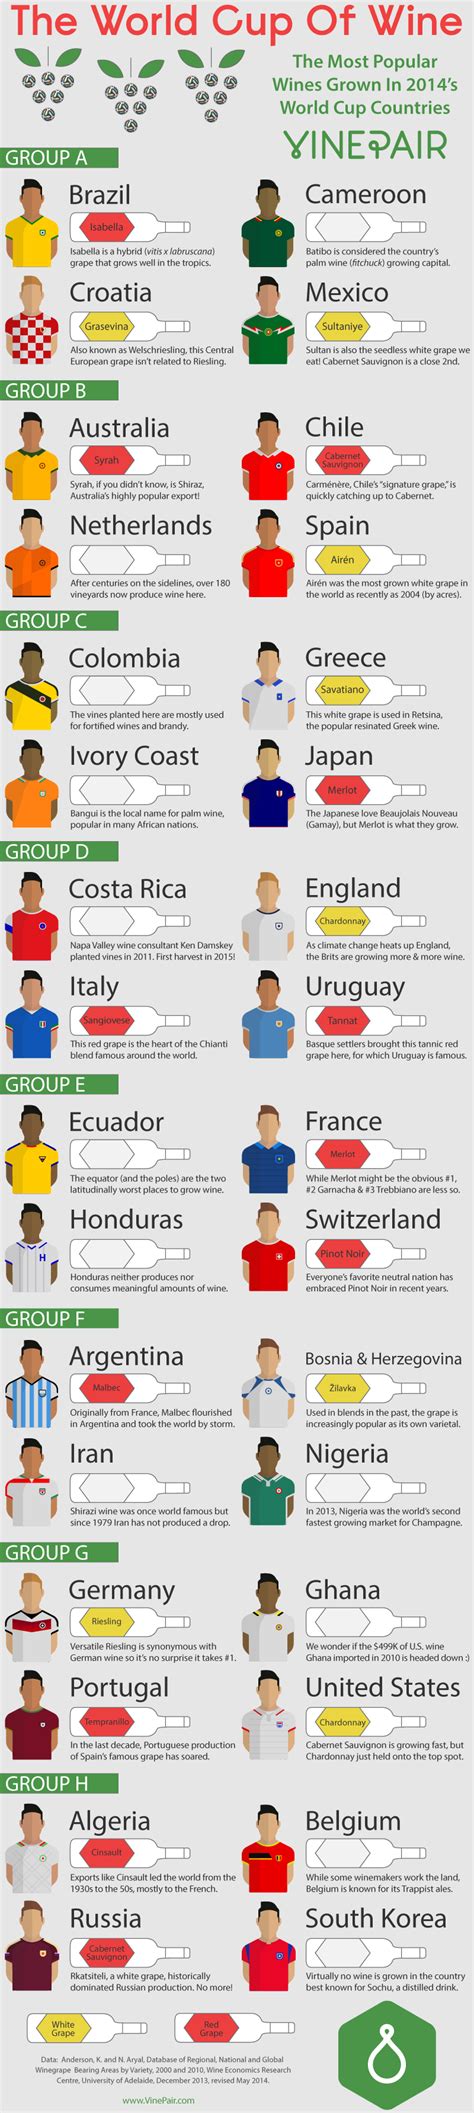 the world cup of wine 2014 infographic